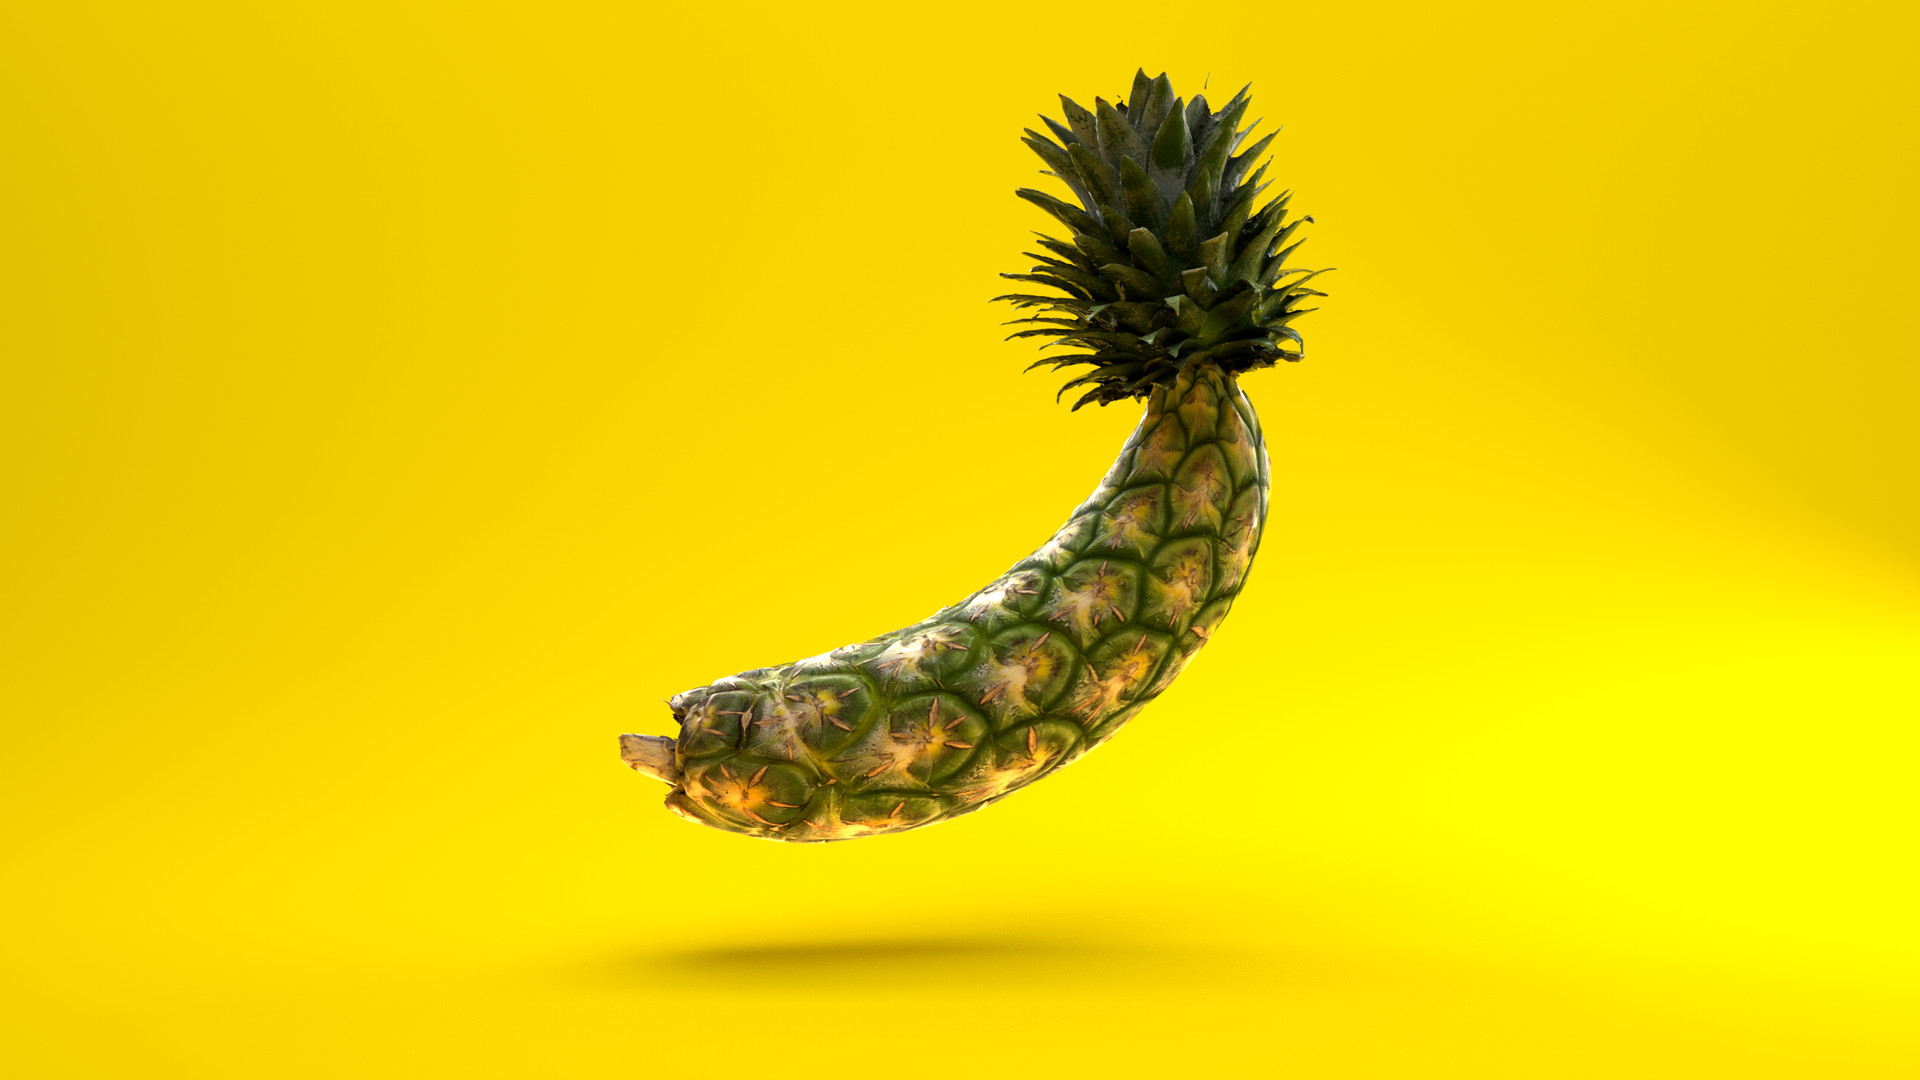 Did you know that in Dutch the word for 'pineapple' is 'anan...